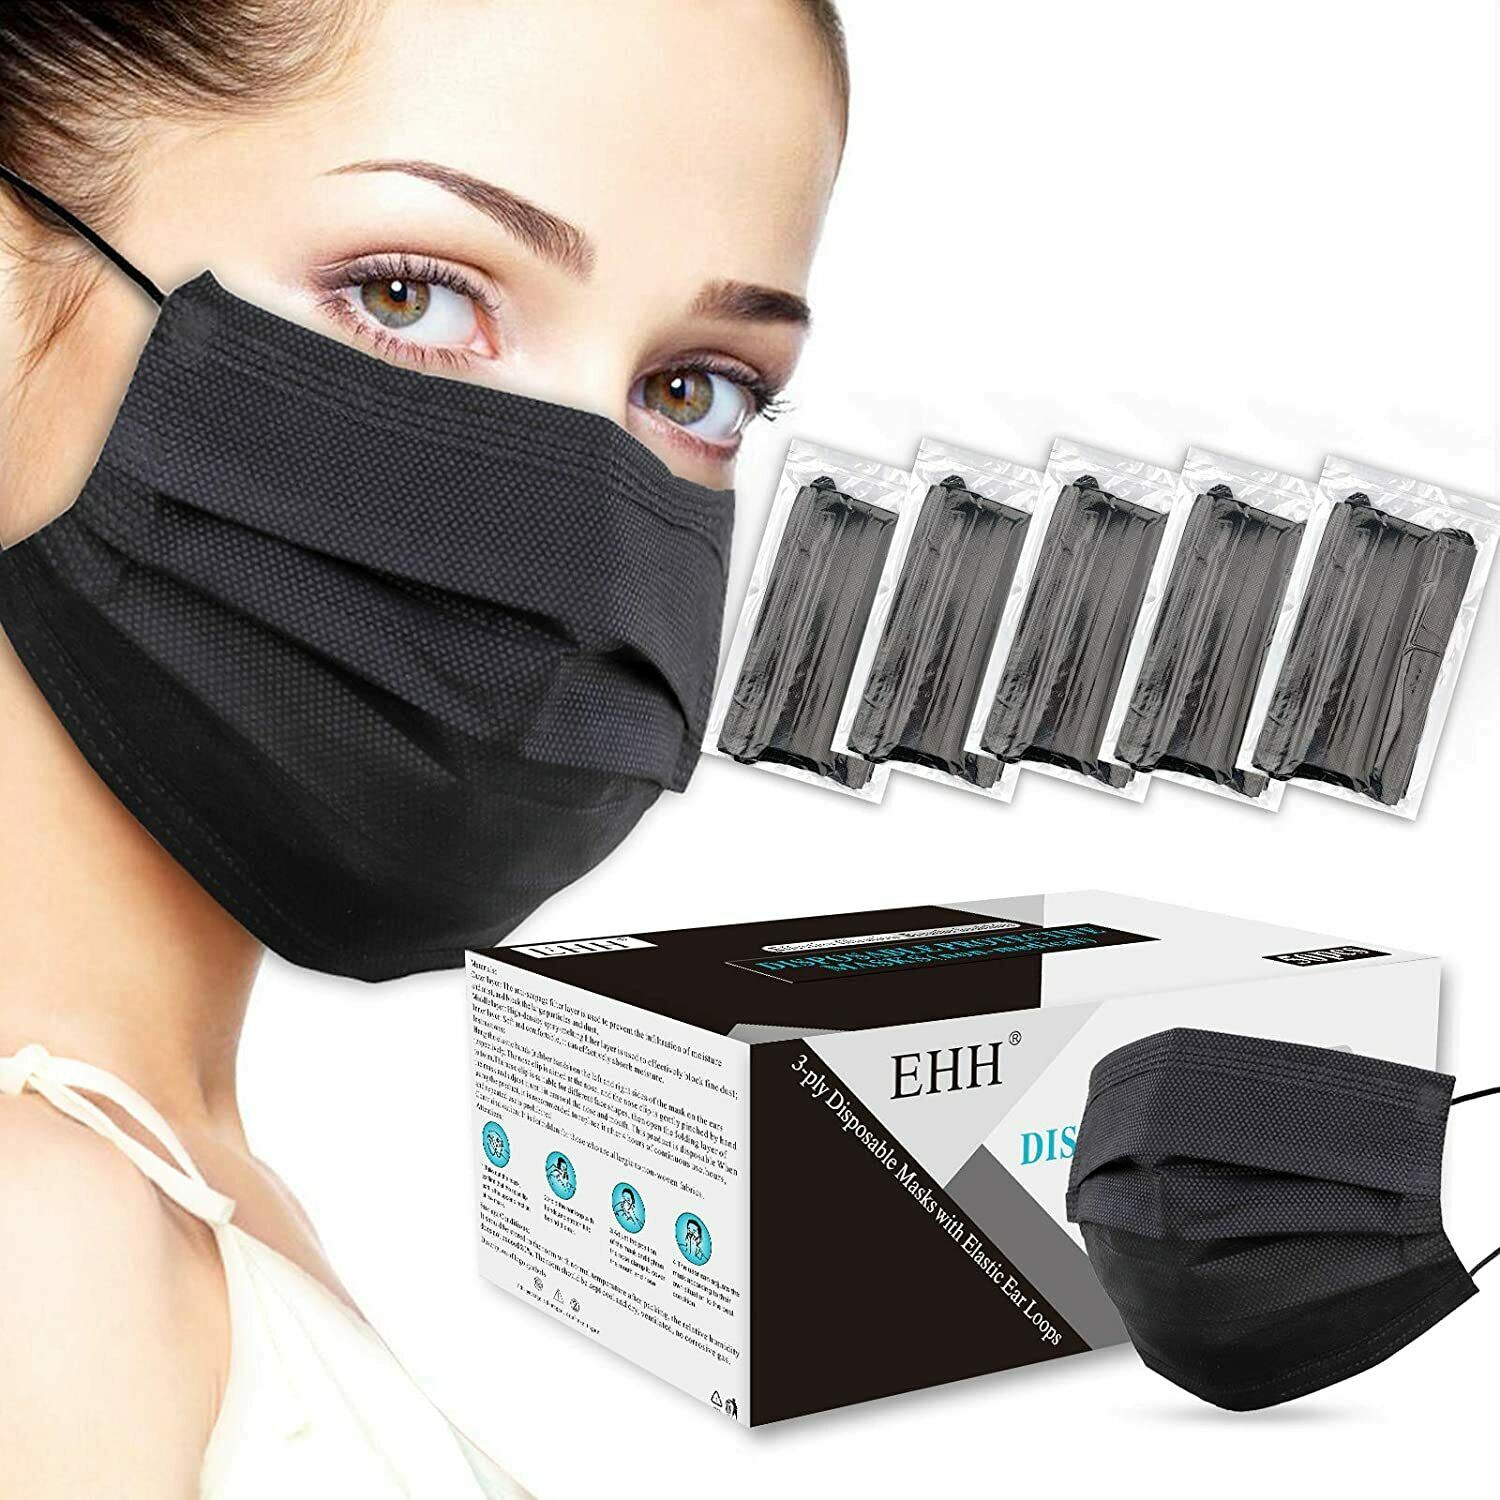 50 / 100 Pcs Black Face Mask Mouth & Nose Protector Respirator Masks With Filter